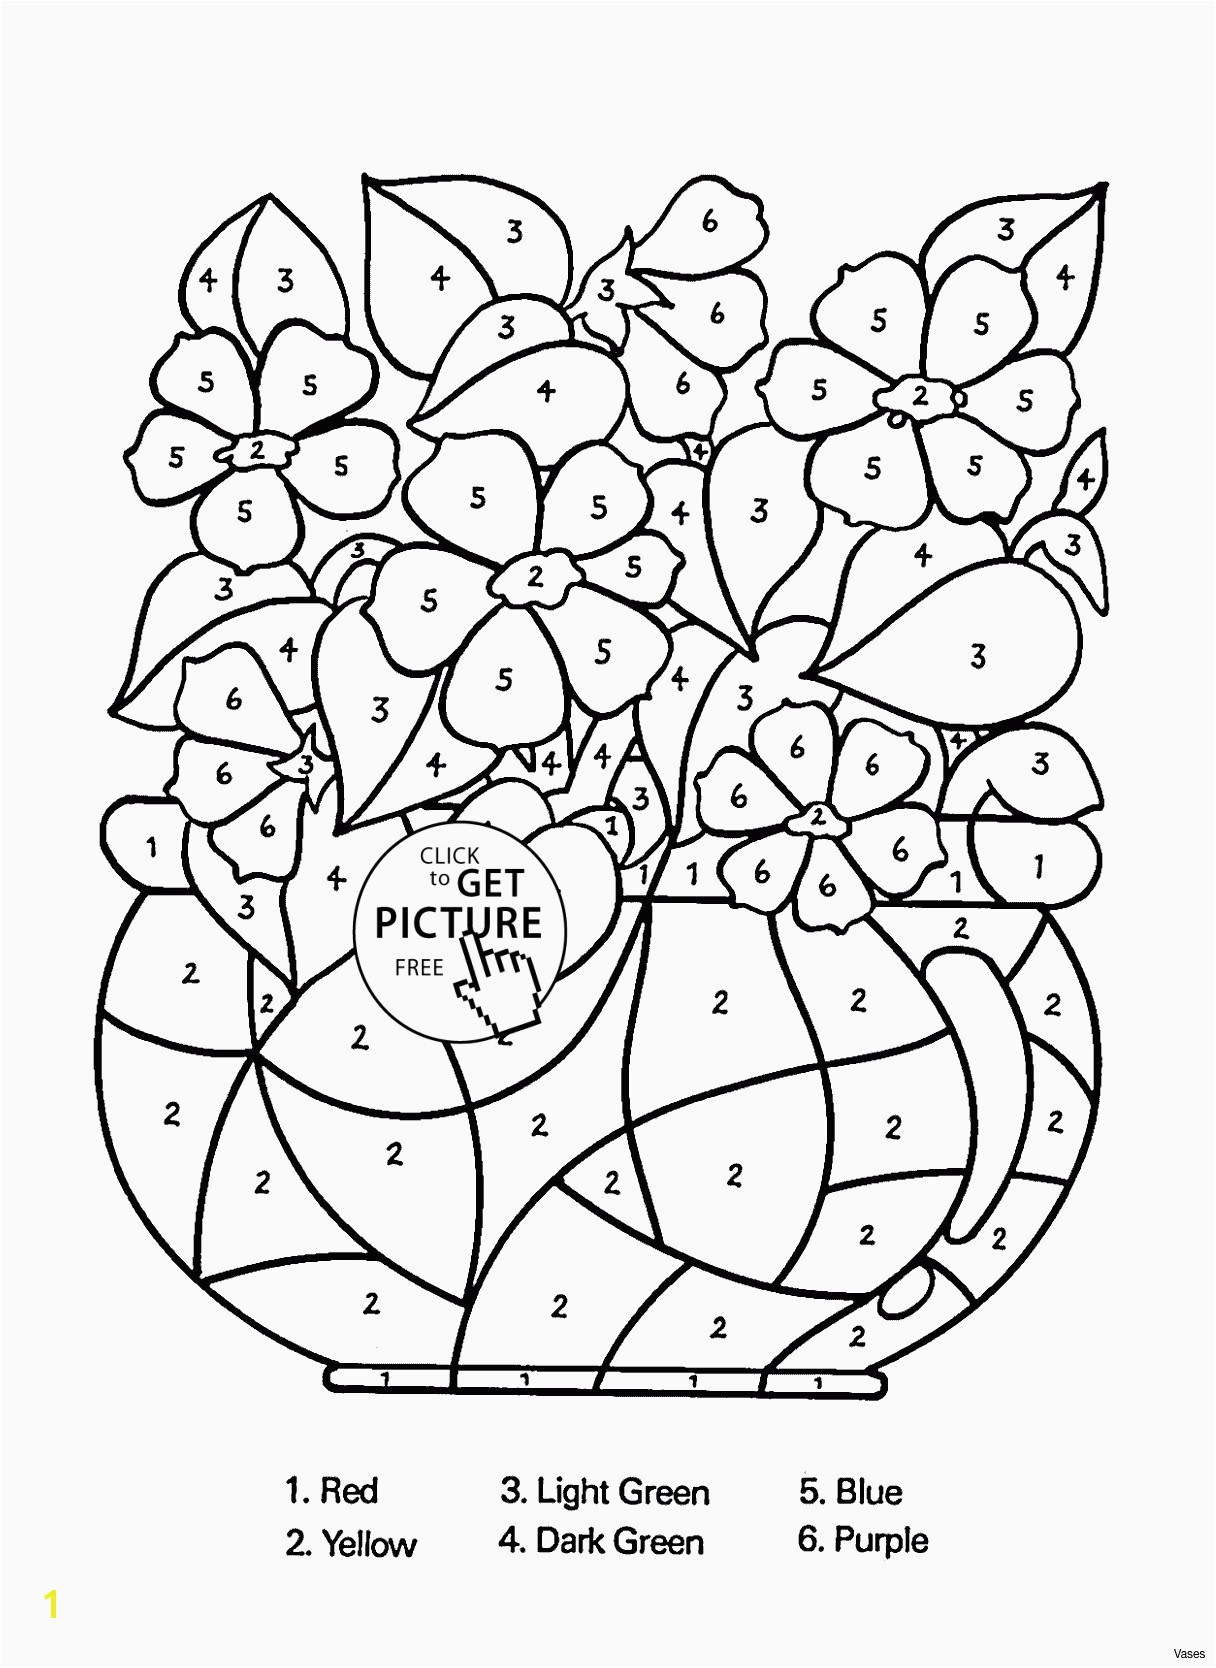 Free Color Pages Inspirational March Coloring Pages Printable Vases Flower Vase Coloring Page Pages